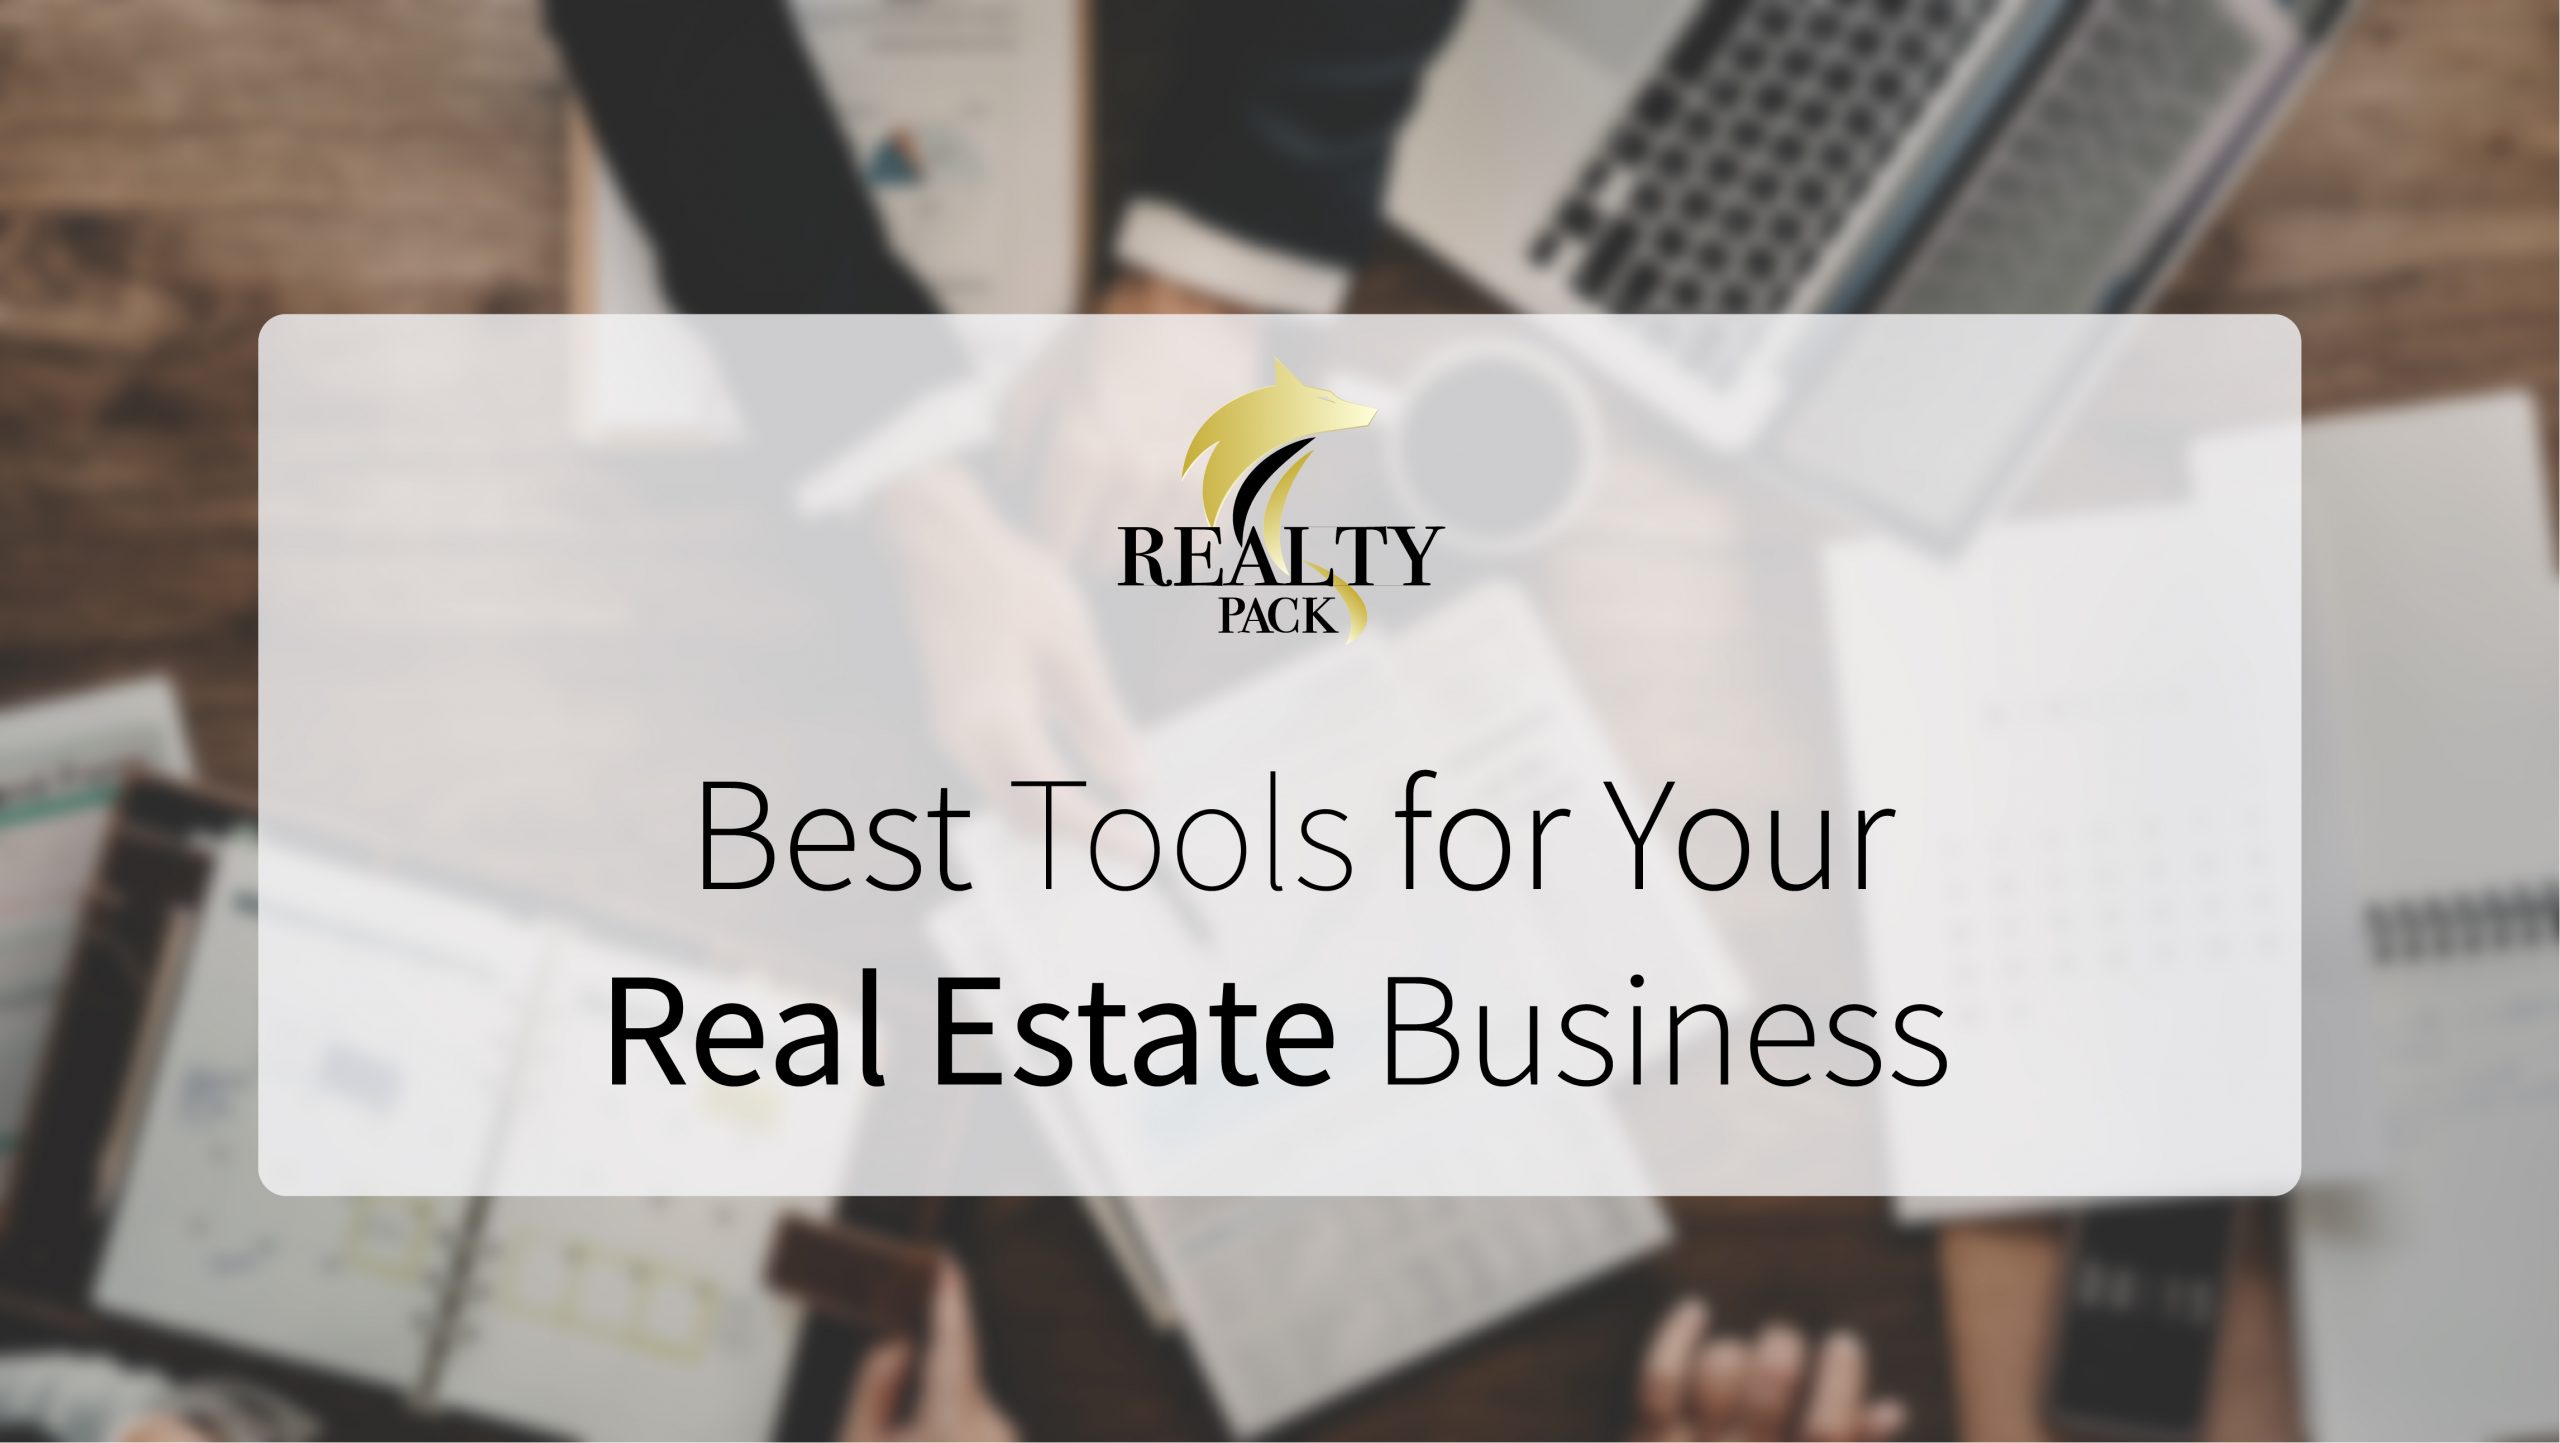 Tools for Your Real Estate business